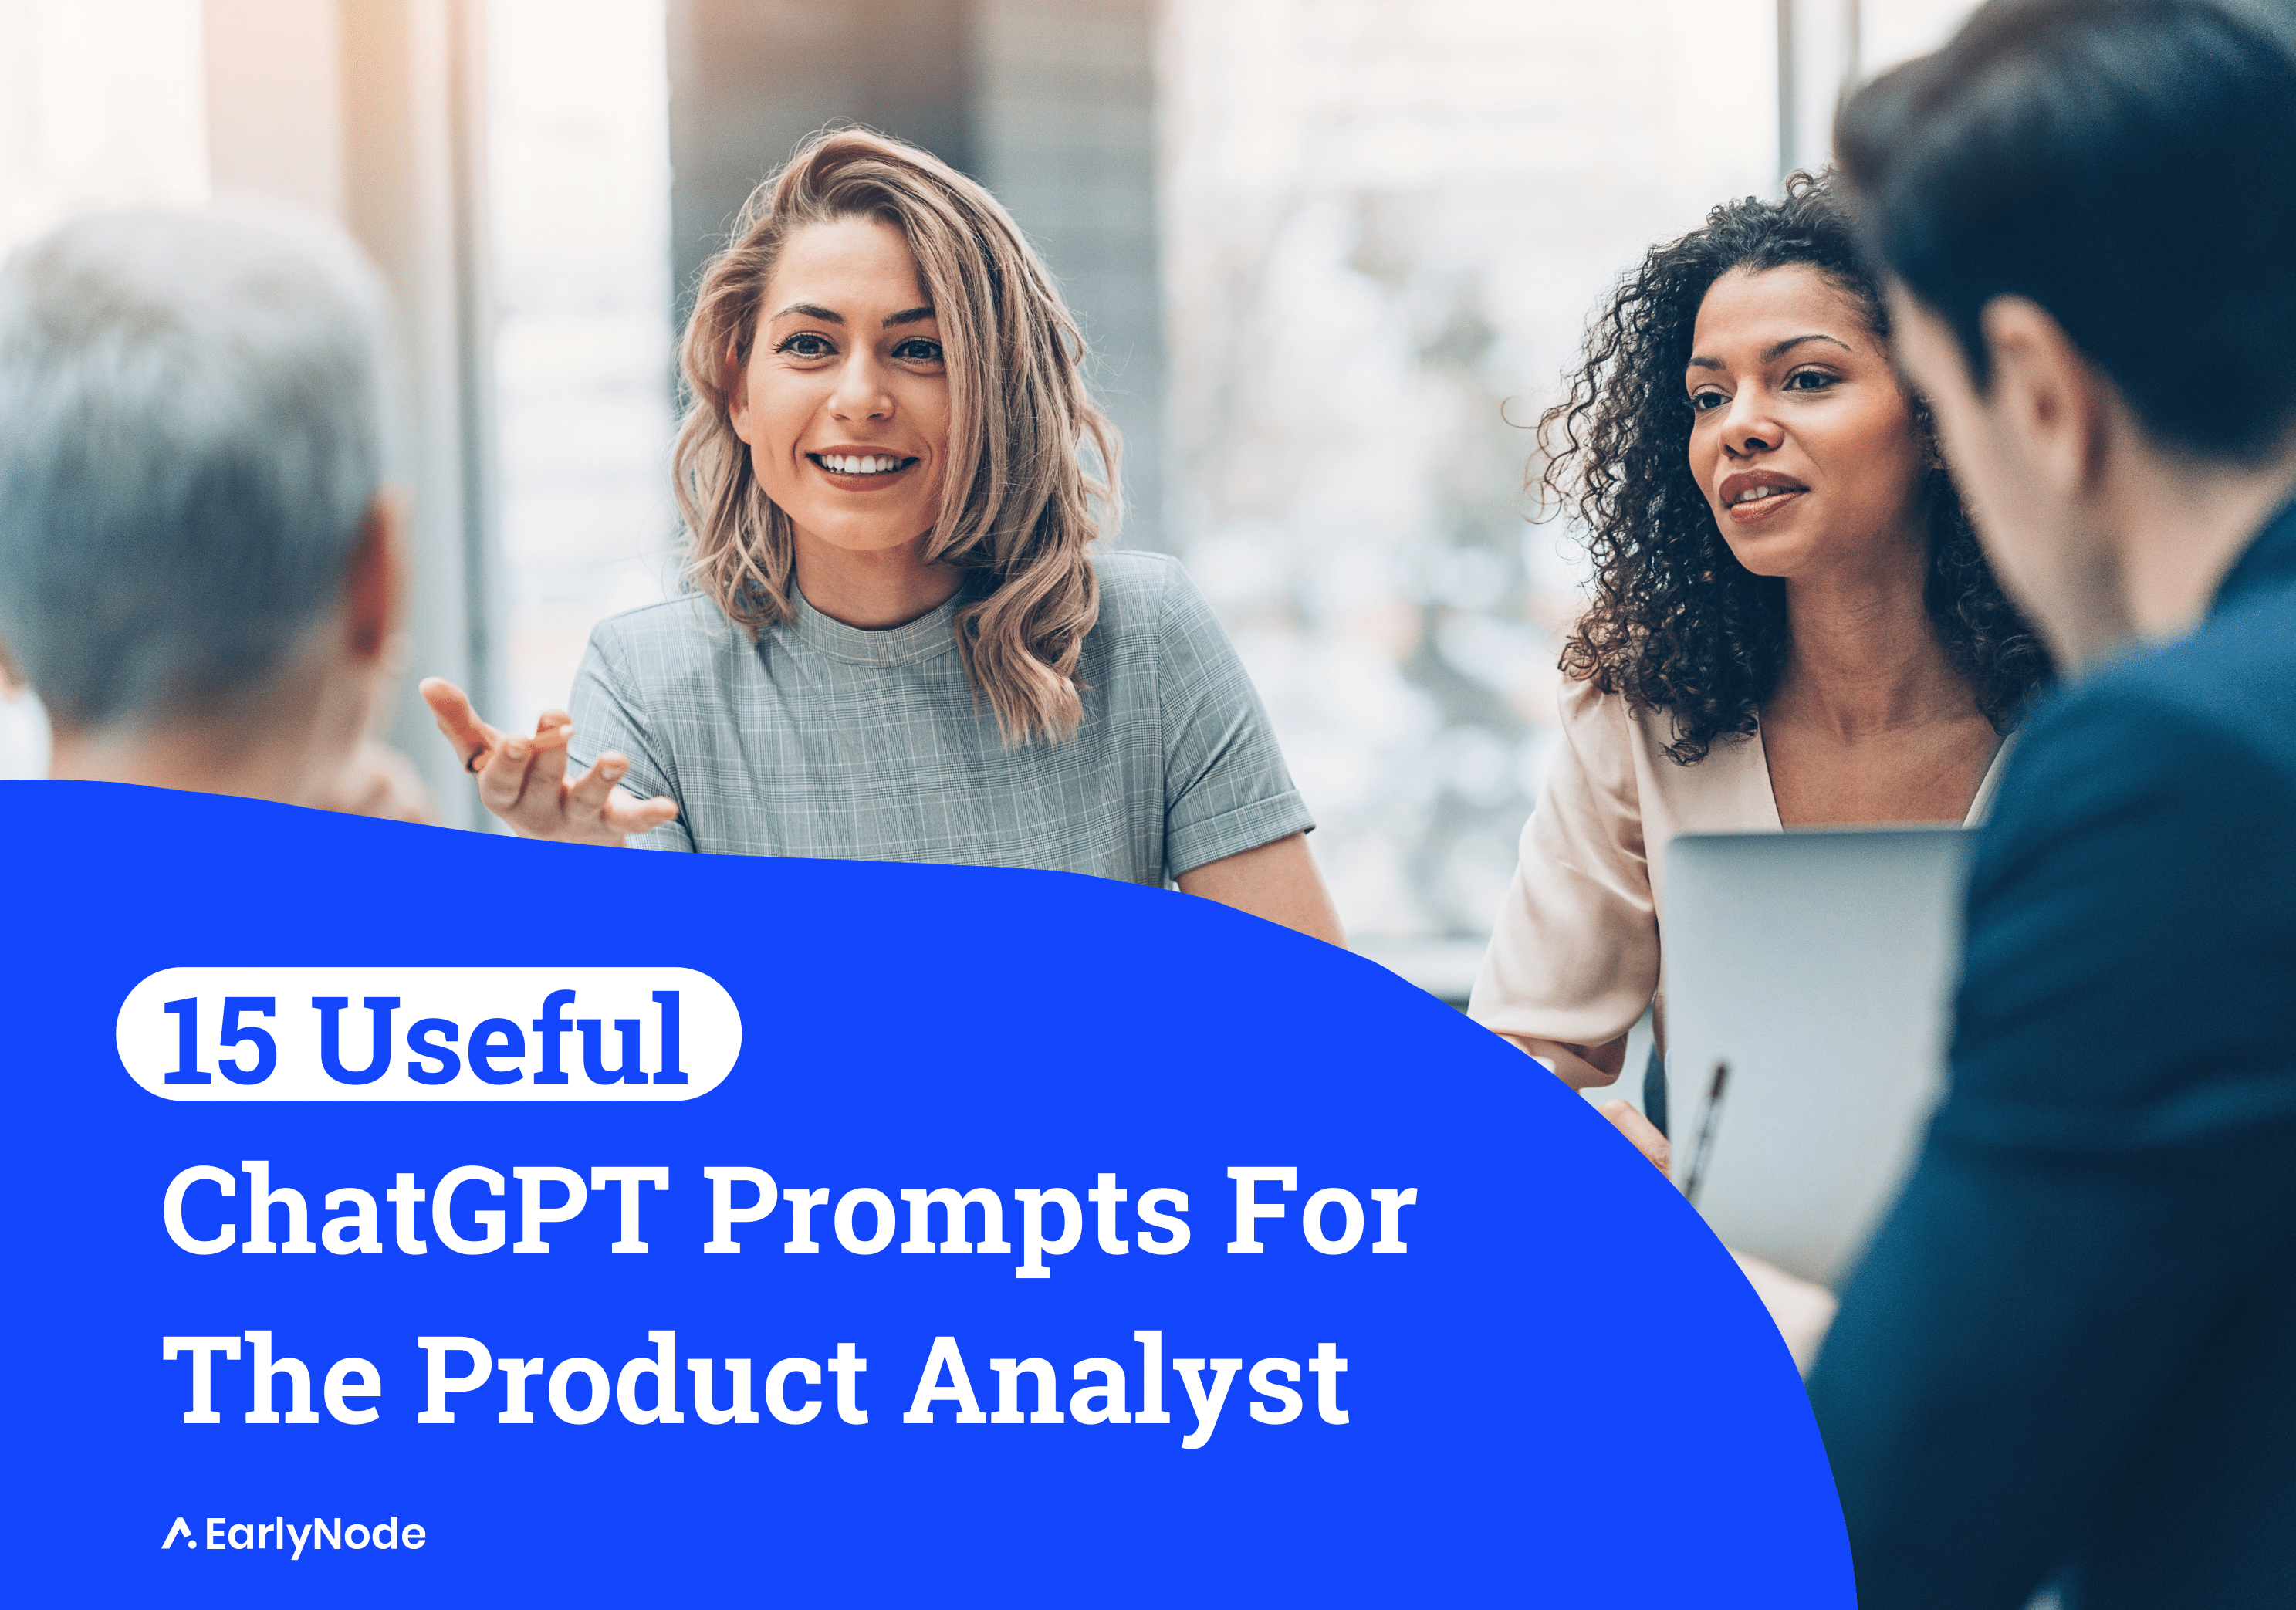 15 Useful ChatGPT Prompts For Product Analysts